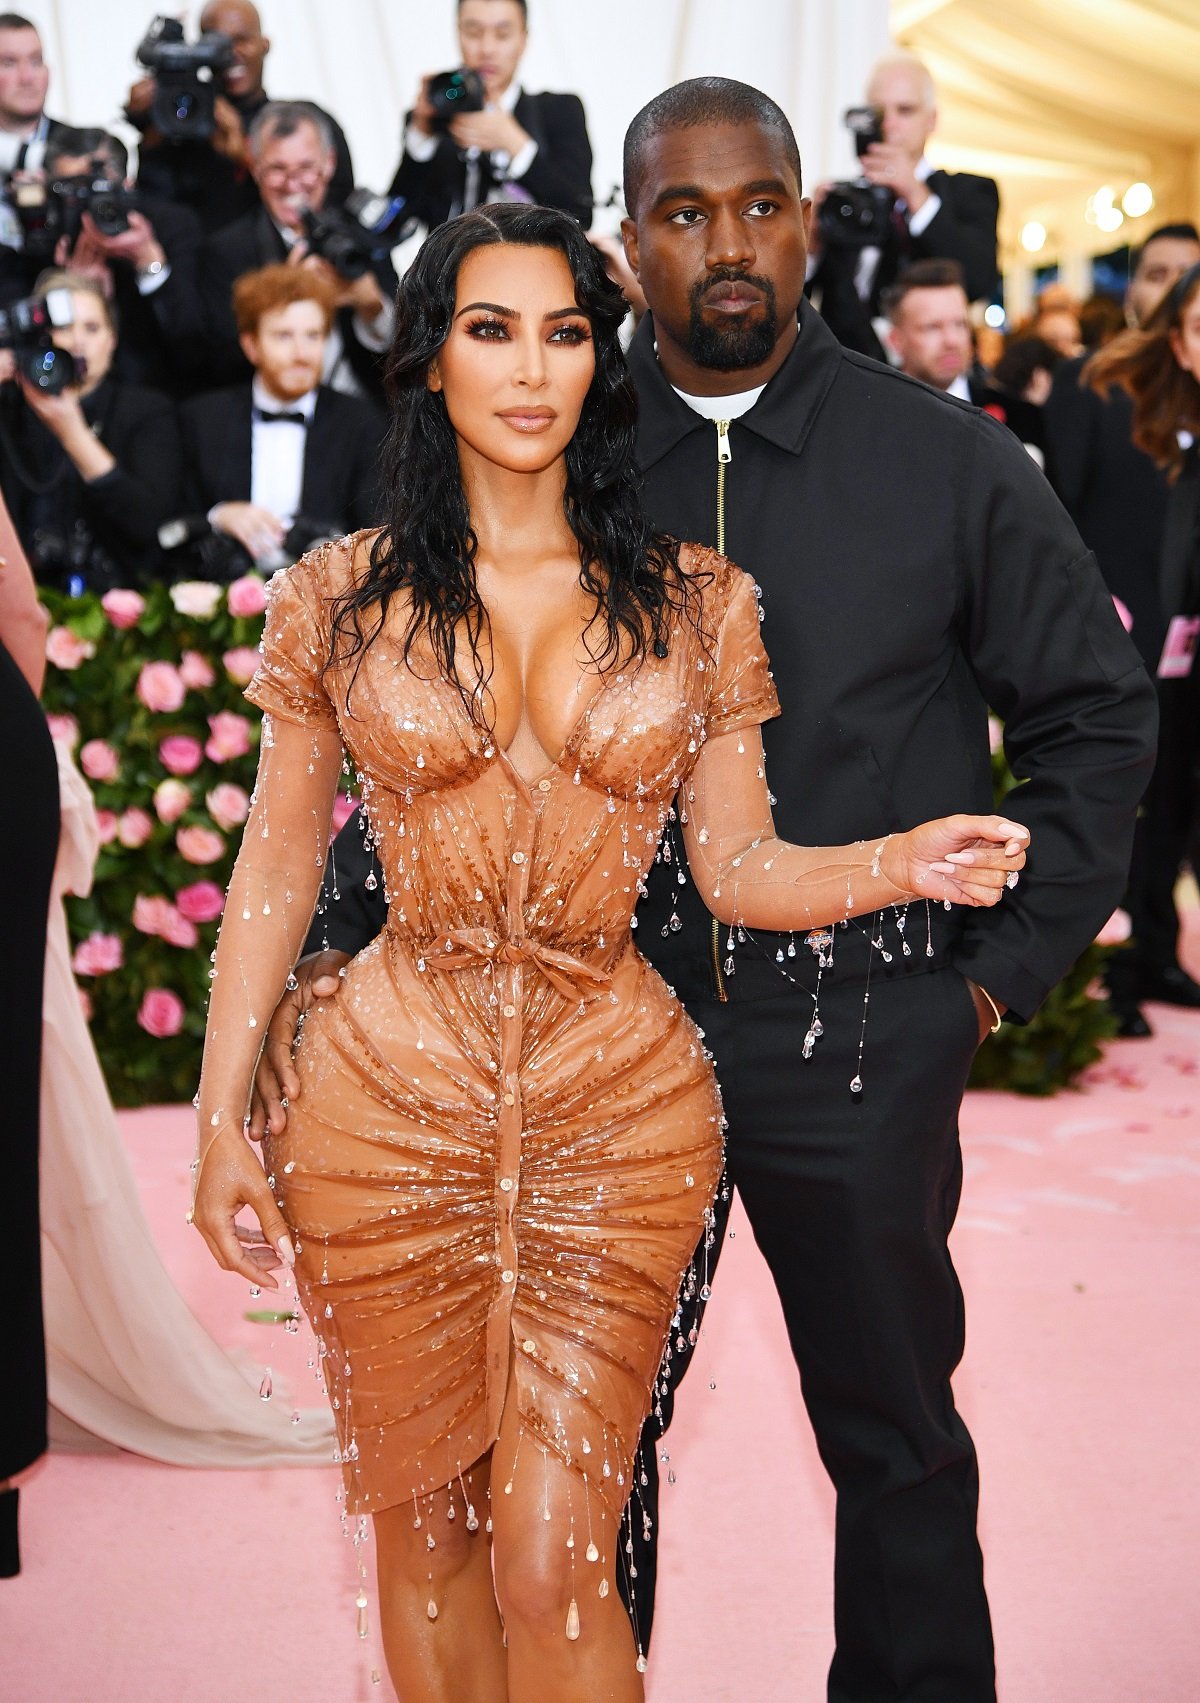 Kim Kardashian and Kanye West at the Met Gala on May 06, 2019 in New York City | Source: Getty Images 